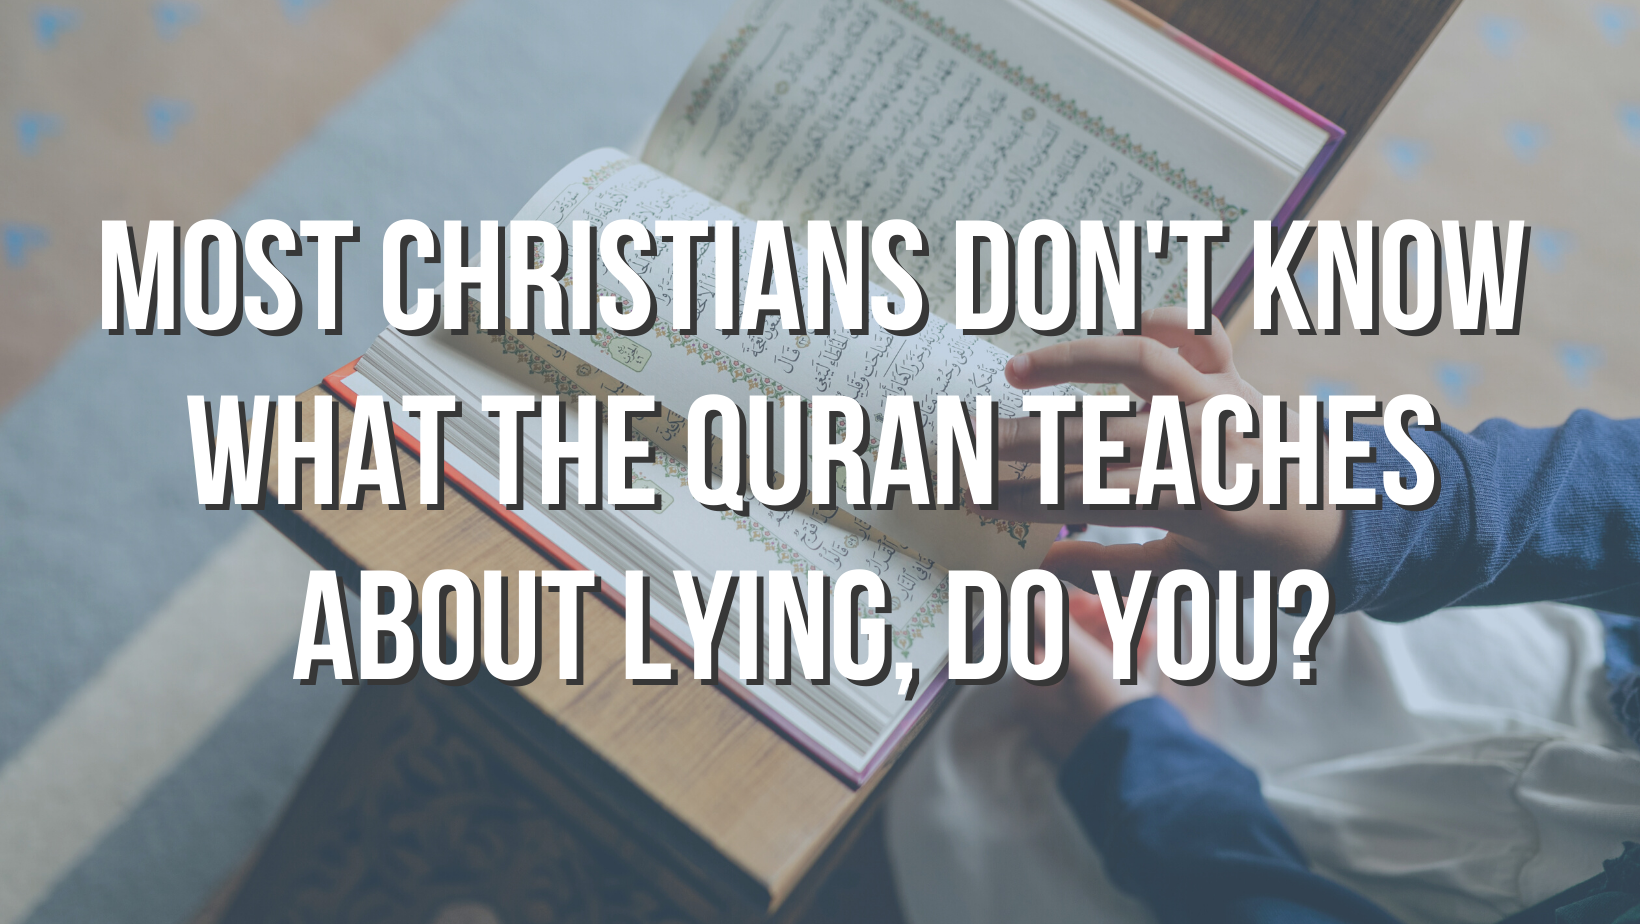 Most Christians don't know what the Quran teaches about lying, do you?